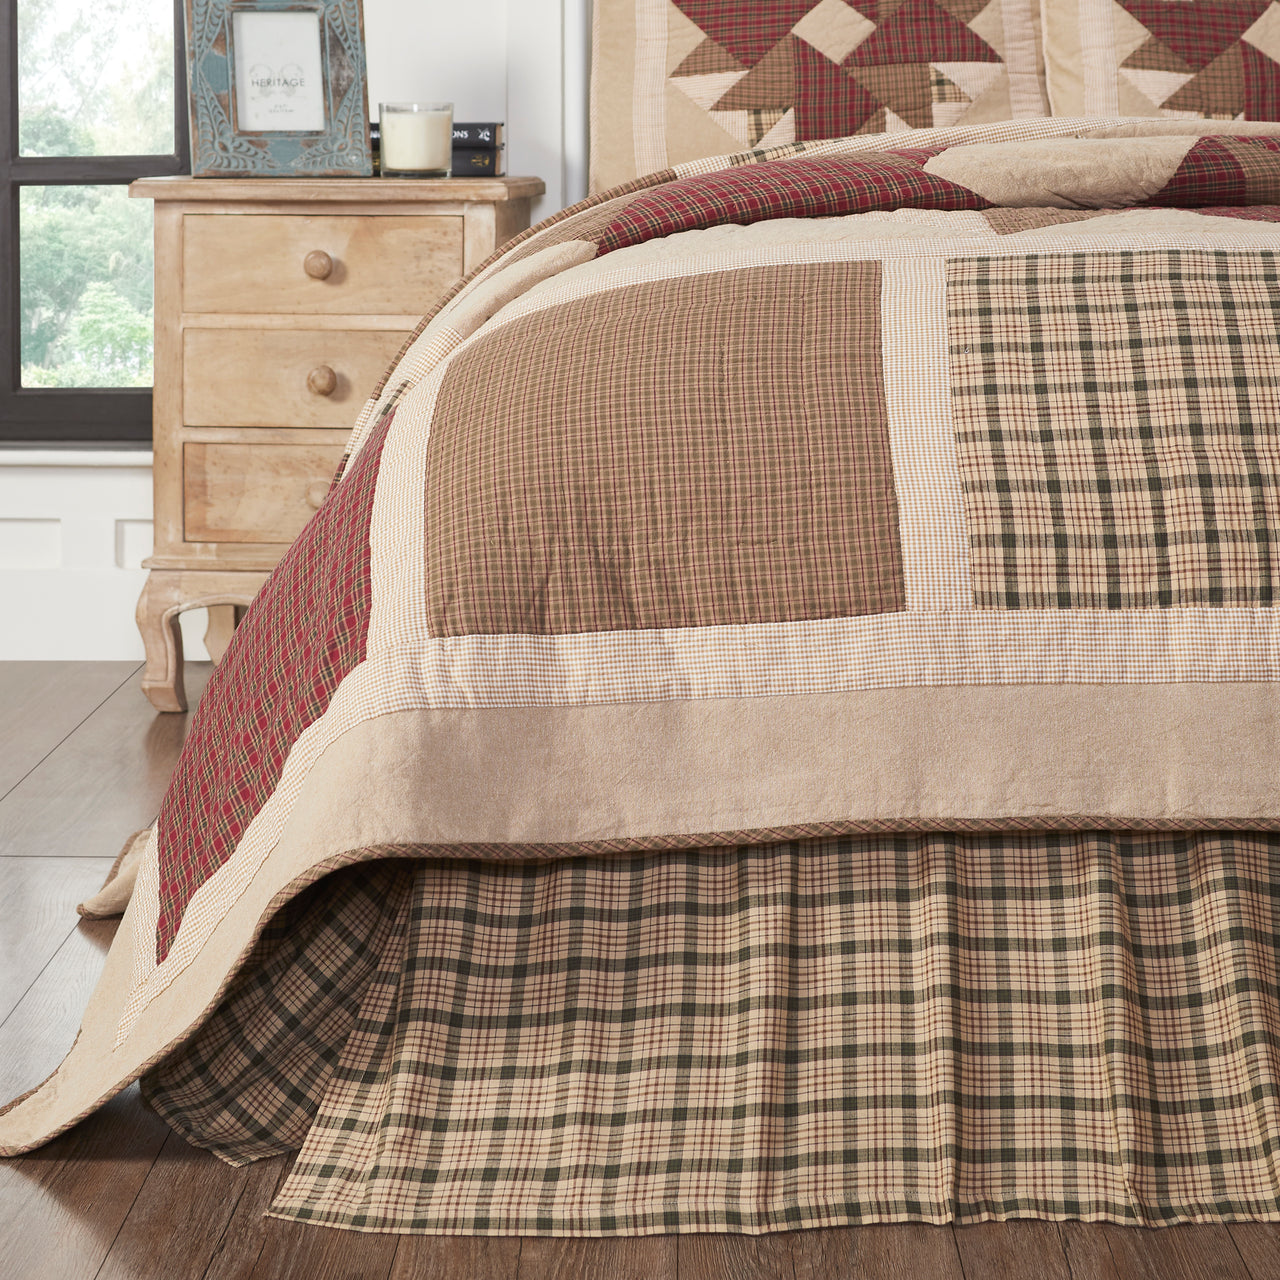 Cider Mill King Bed Skirt 78x80x16 VHC Brands